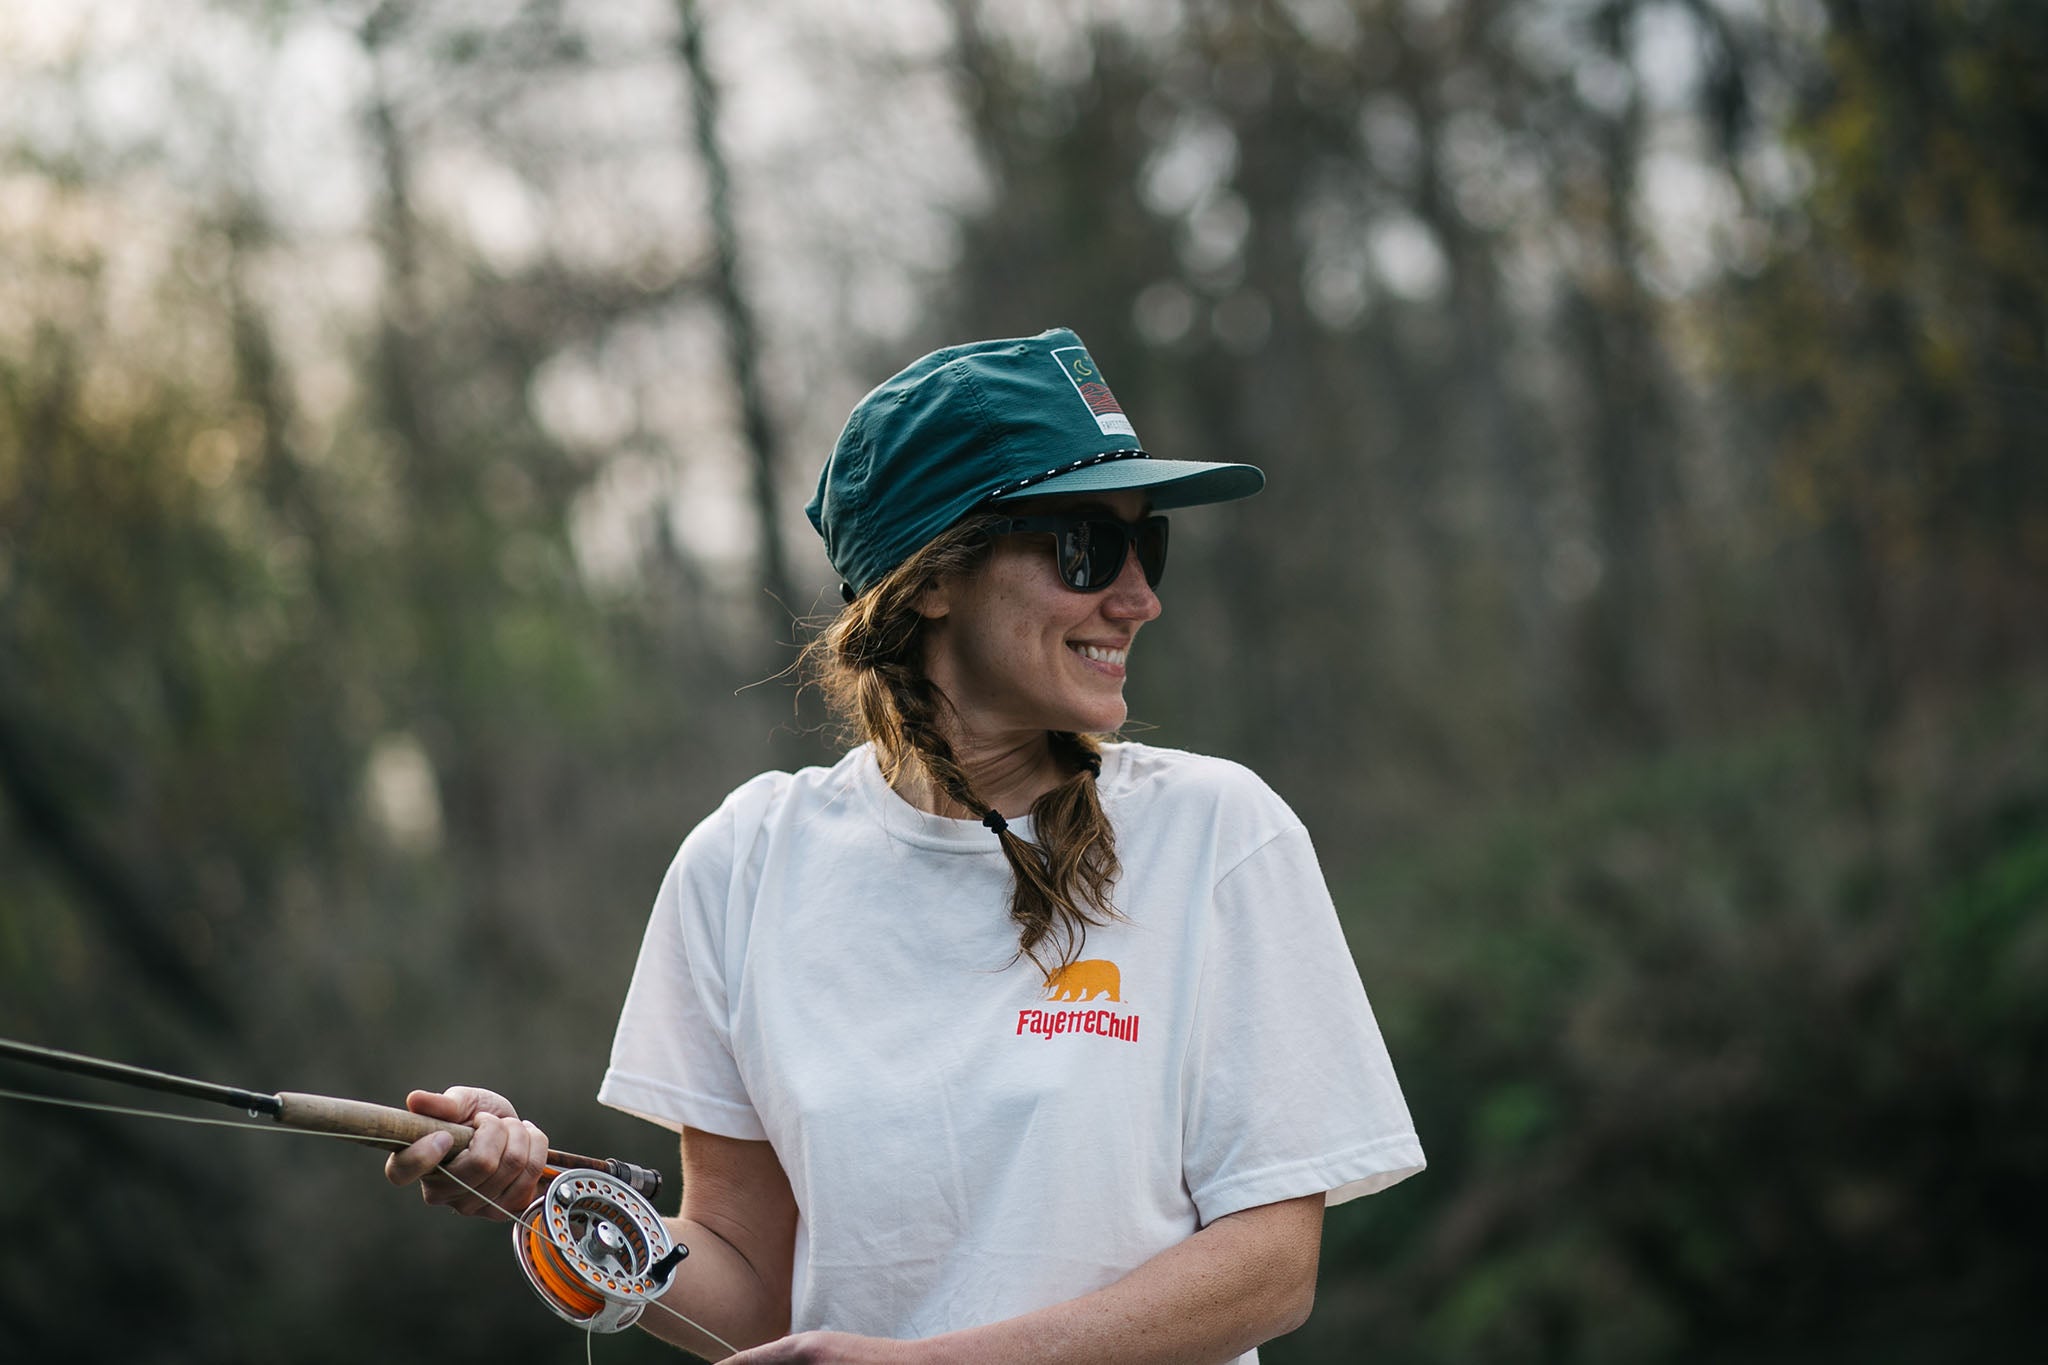 Fly Fishing and Female: Putting #5050ontheWater into Practice – Fayettechill